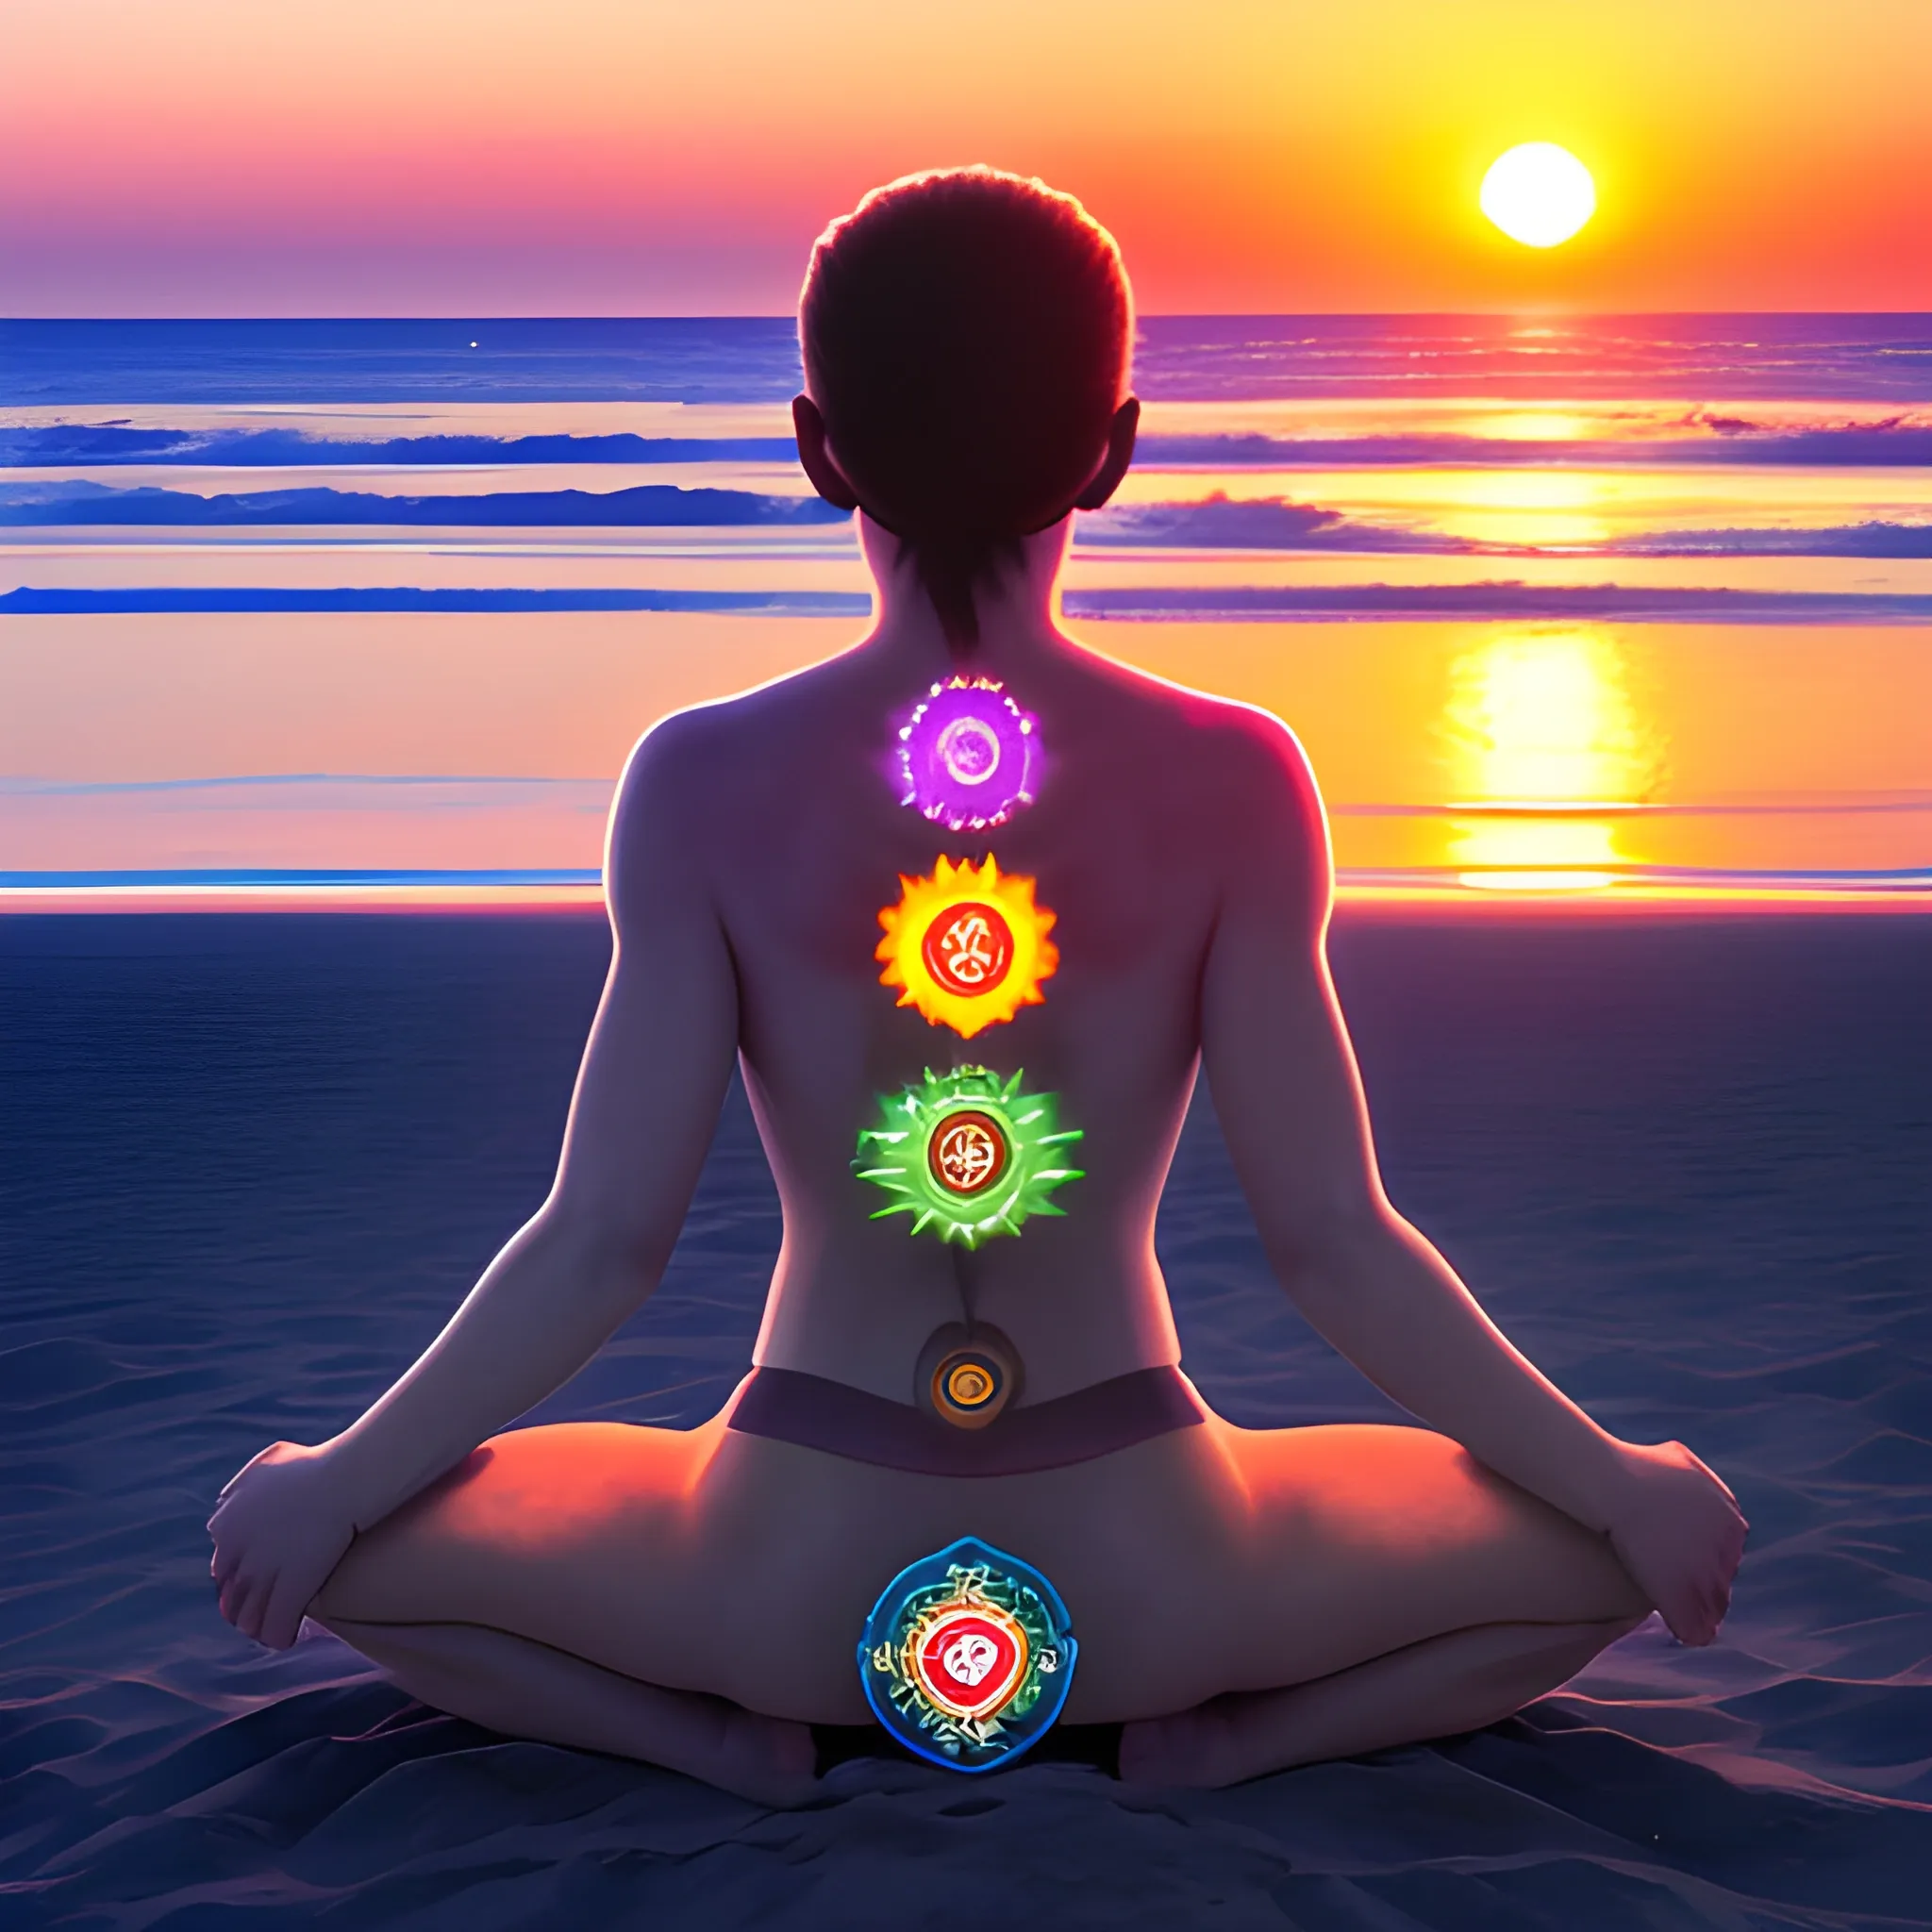 human being with the seven chakras, beach, sunset
